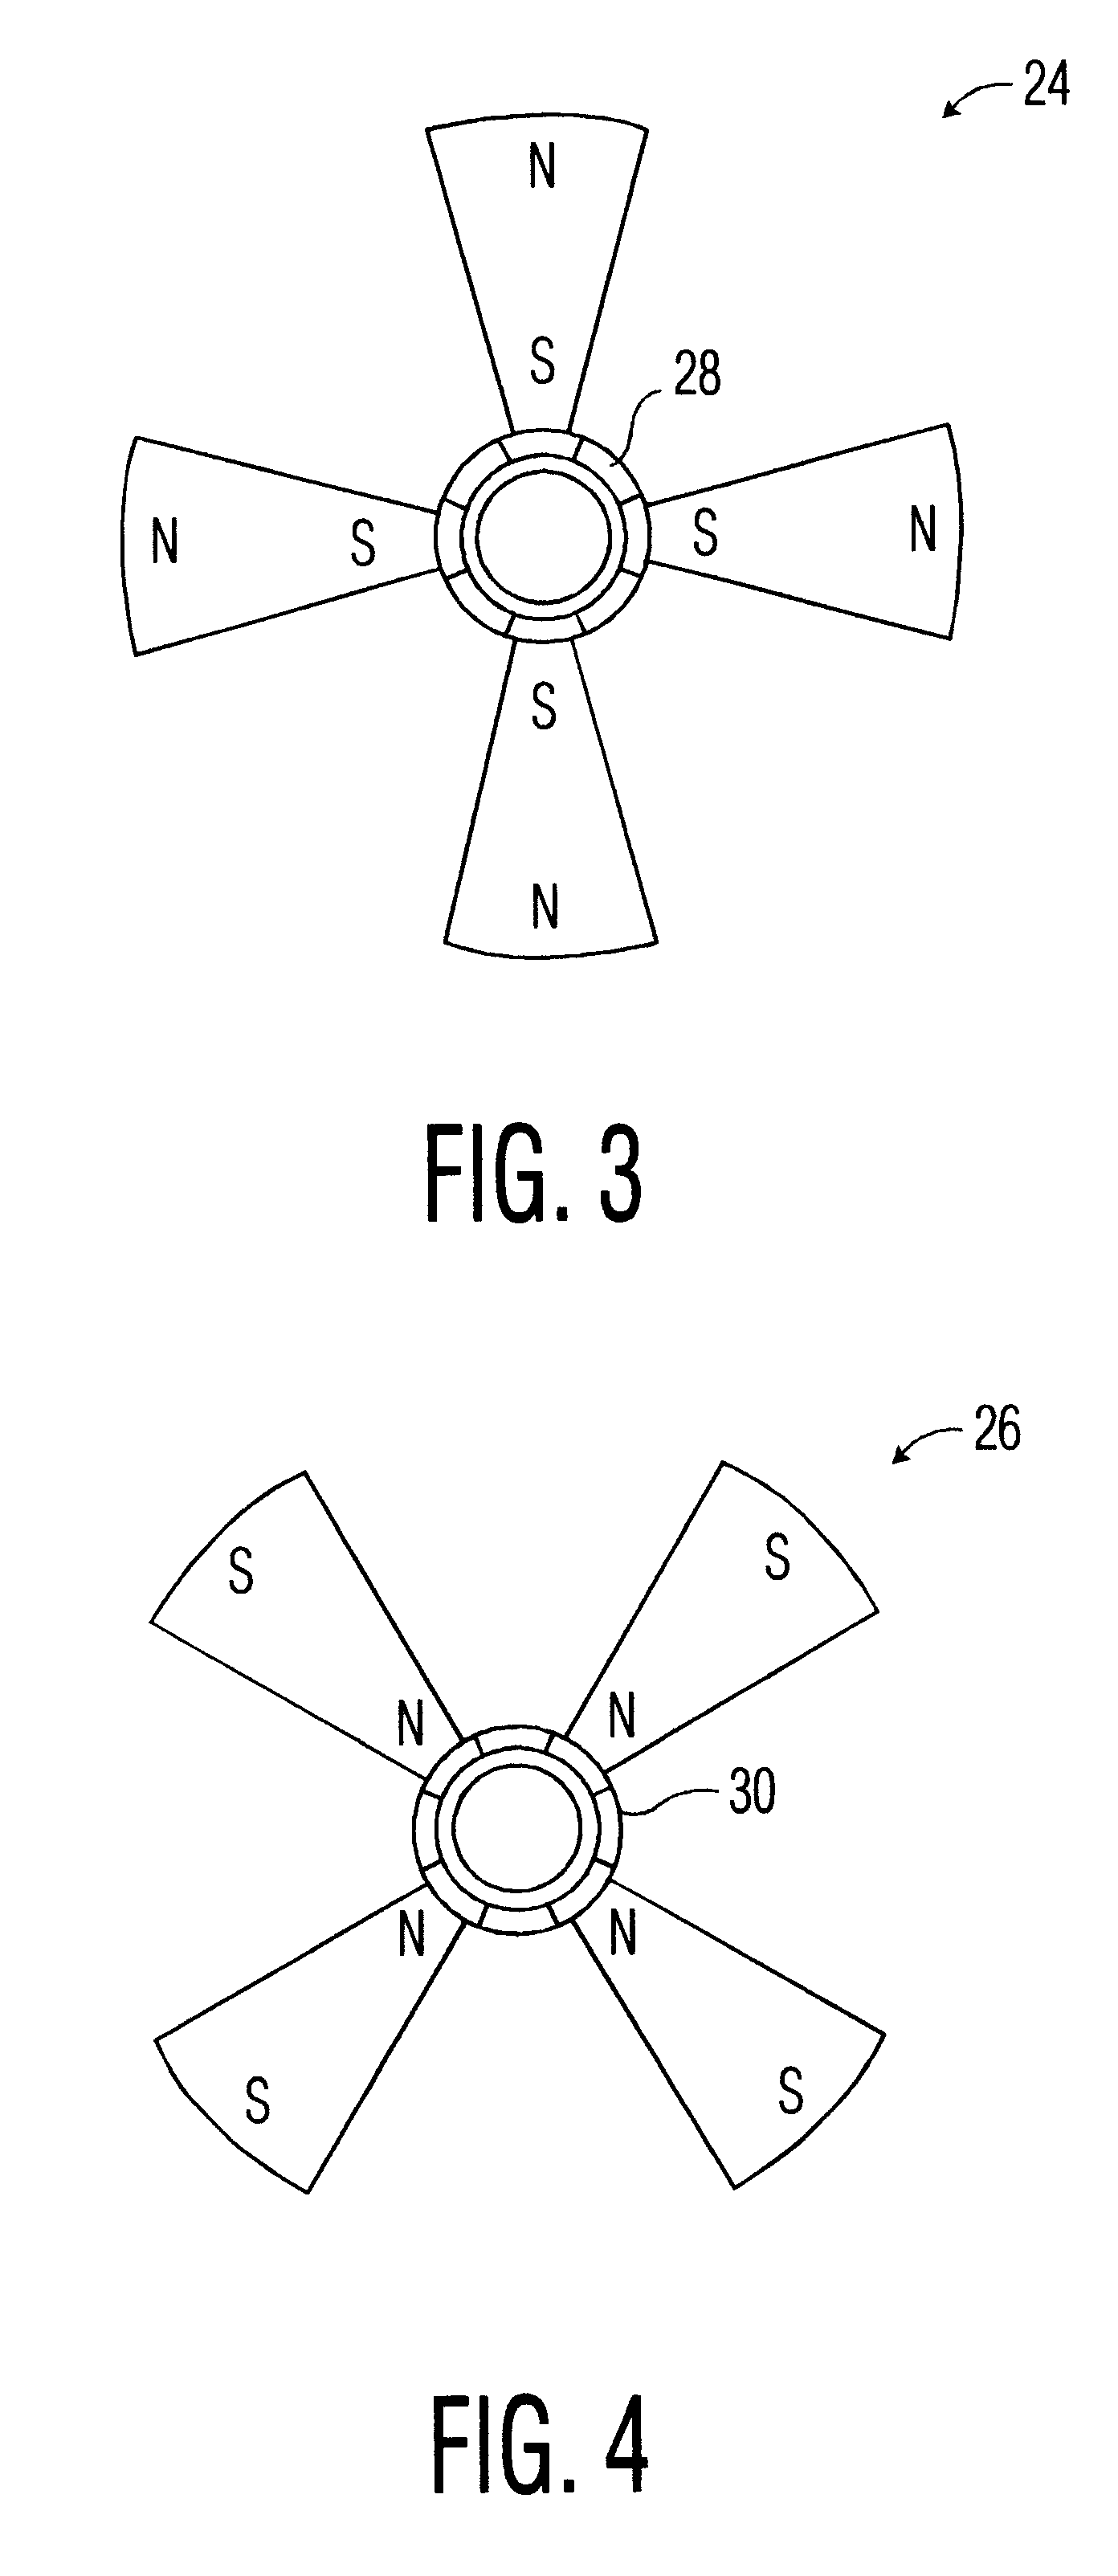 Fan with magnetic blades